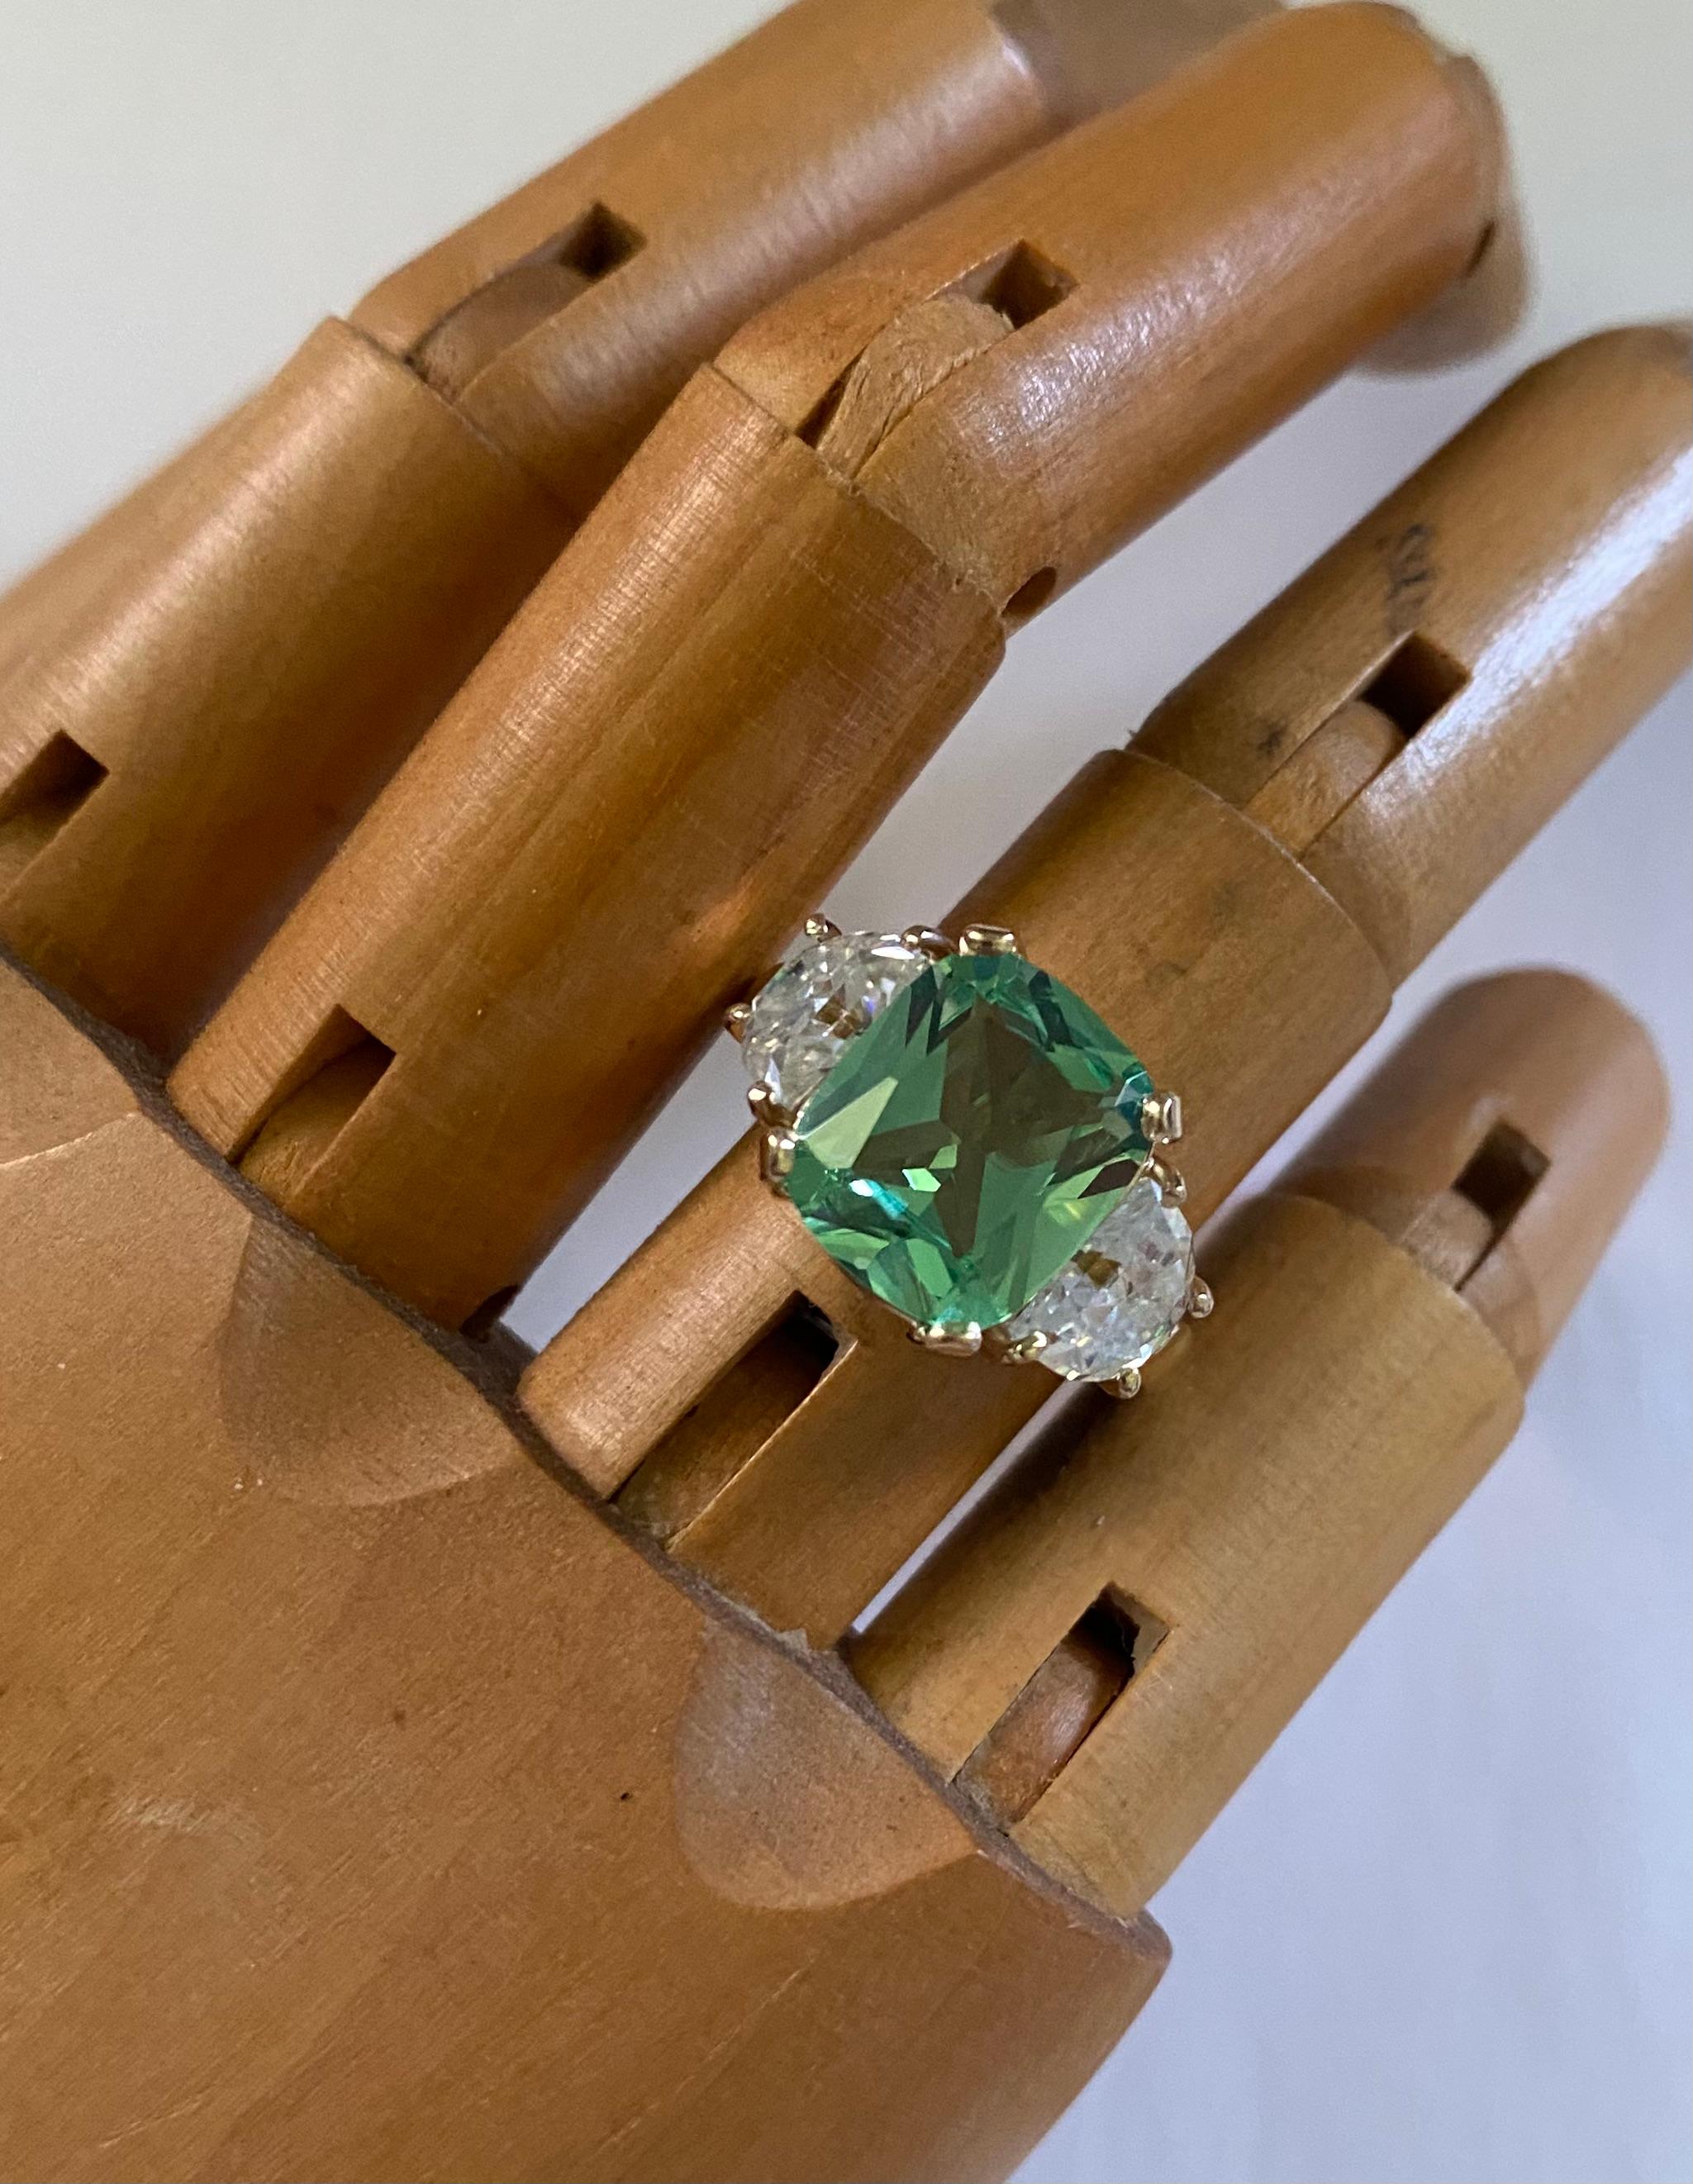 Merelani mint garnet is featured in this classic three stone ring.  Merelani garnet is named after its mining location, the Merelani Hils of Tanzania.  Like Tsavorite Garnets, they are a form of Grossular Garnet.  Both garnet types are found in the